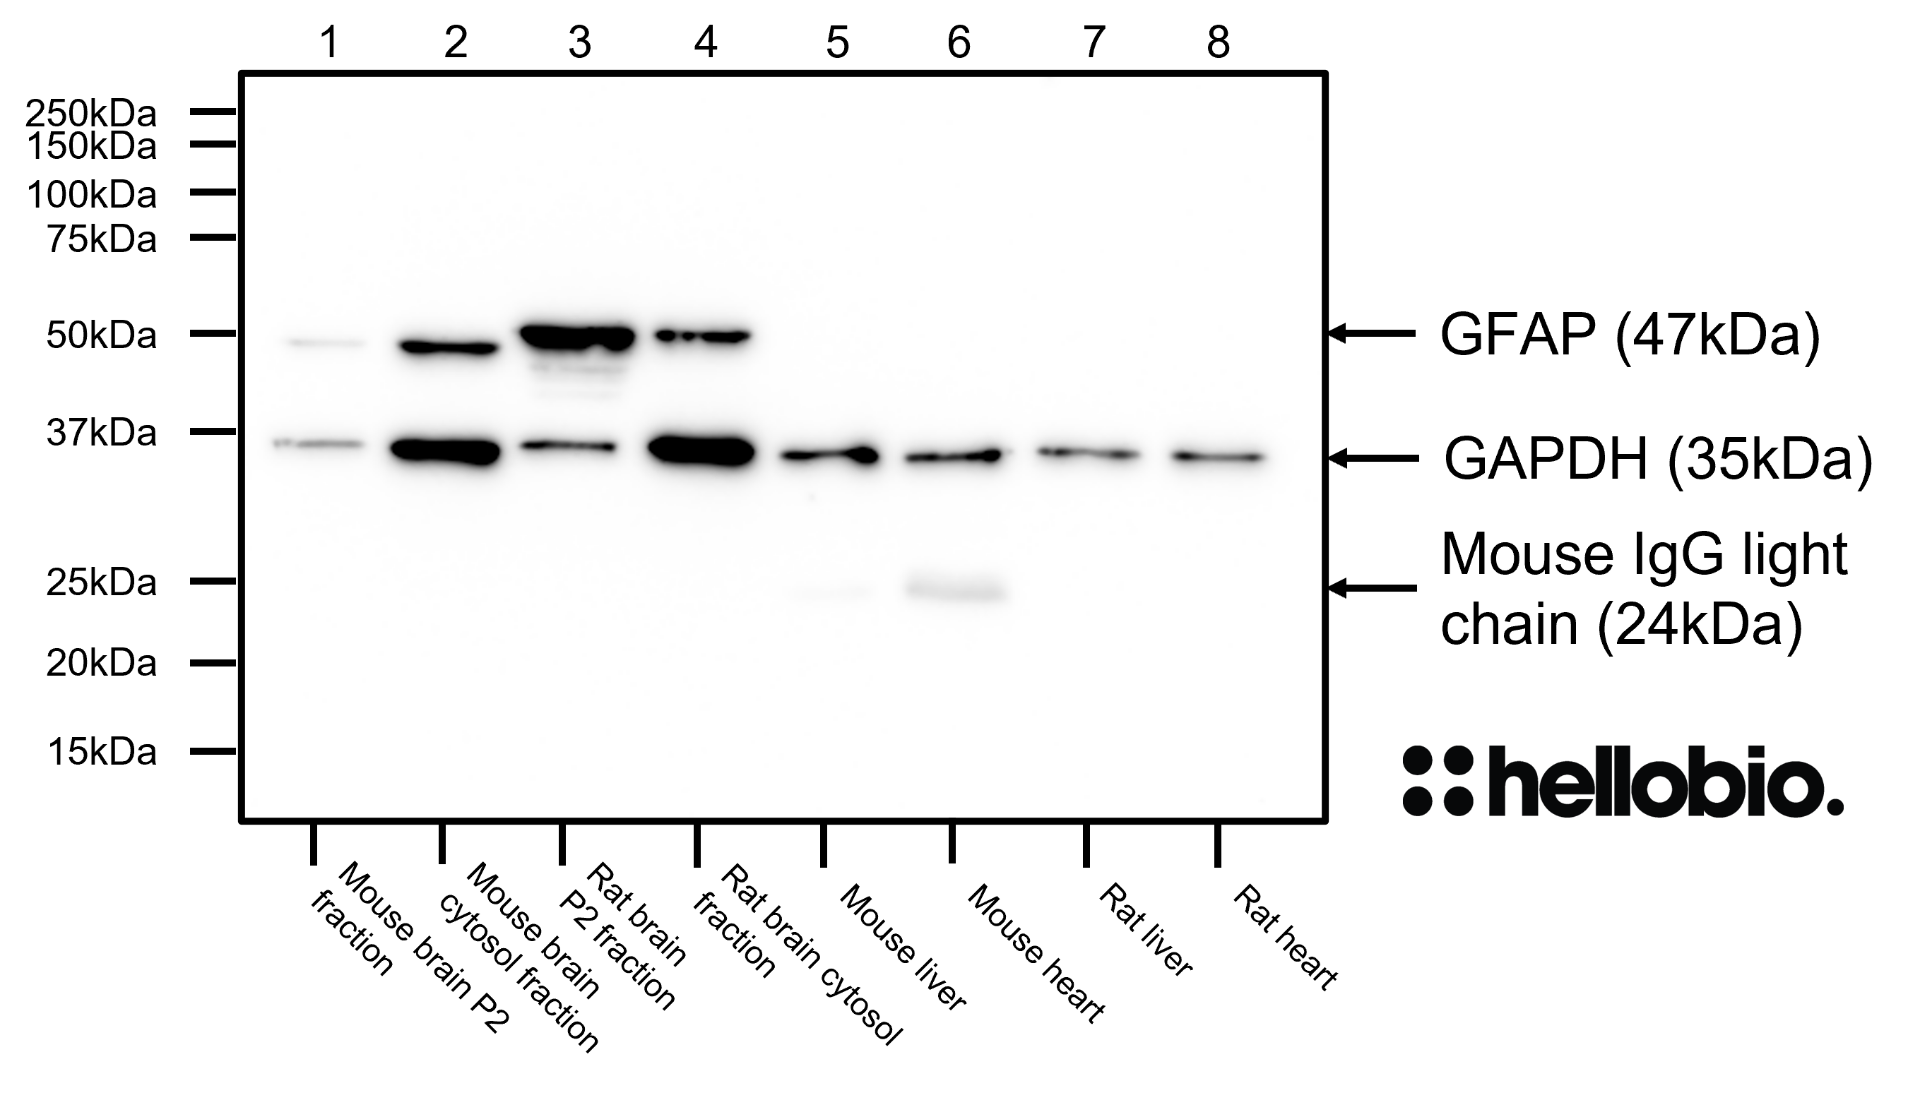 Figure 8. GFAP expression in various tissue lysates and preparations with GAPDH loading control. 